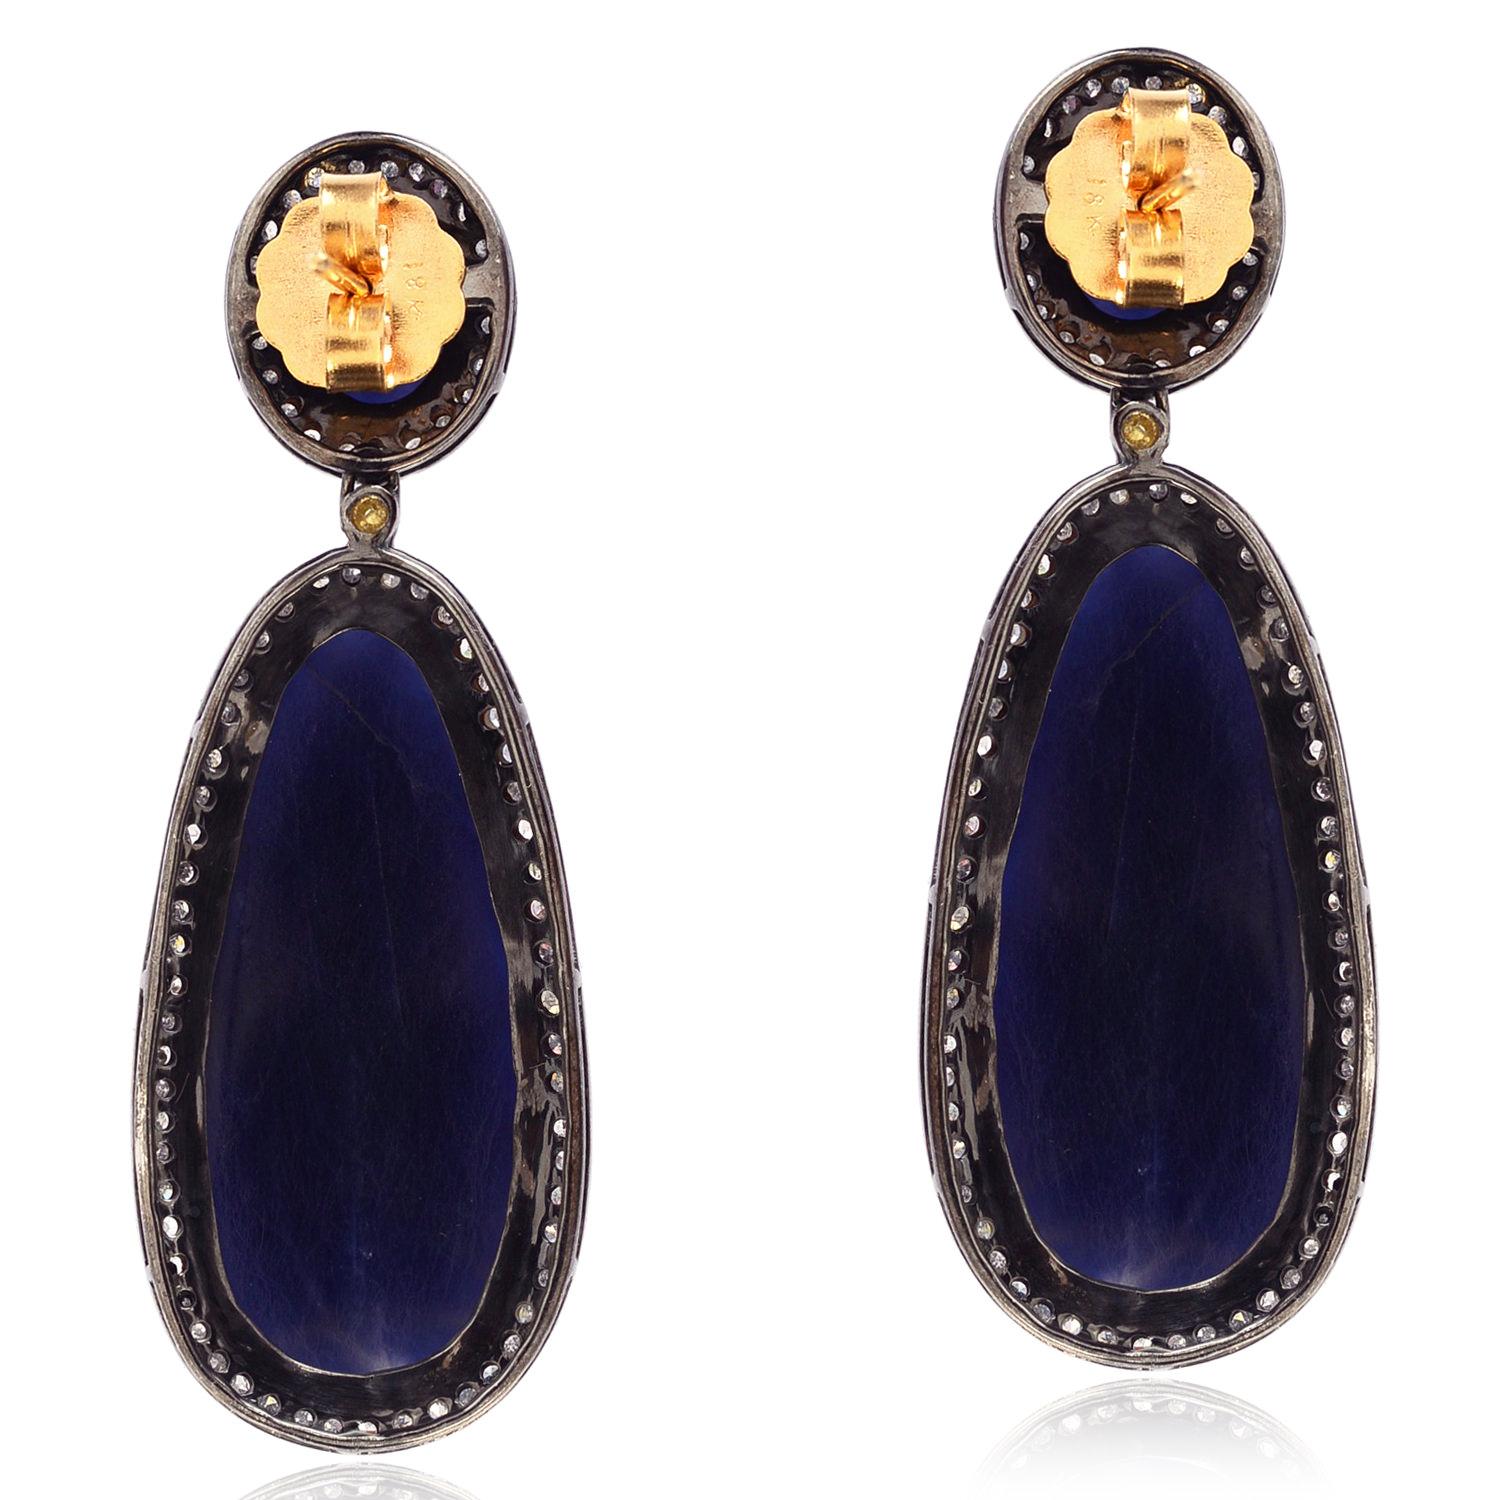 Make a statement with these stunning Oval & Drop Shaped Sapphire Earrings featuring Pave Diamond accents in 18k Gold & Silver. Perfect for adding a touch of elegance to any outfit, these earrings are sure to become a cherished addition to your